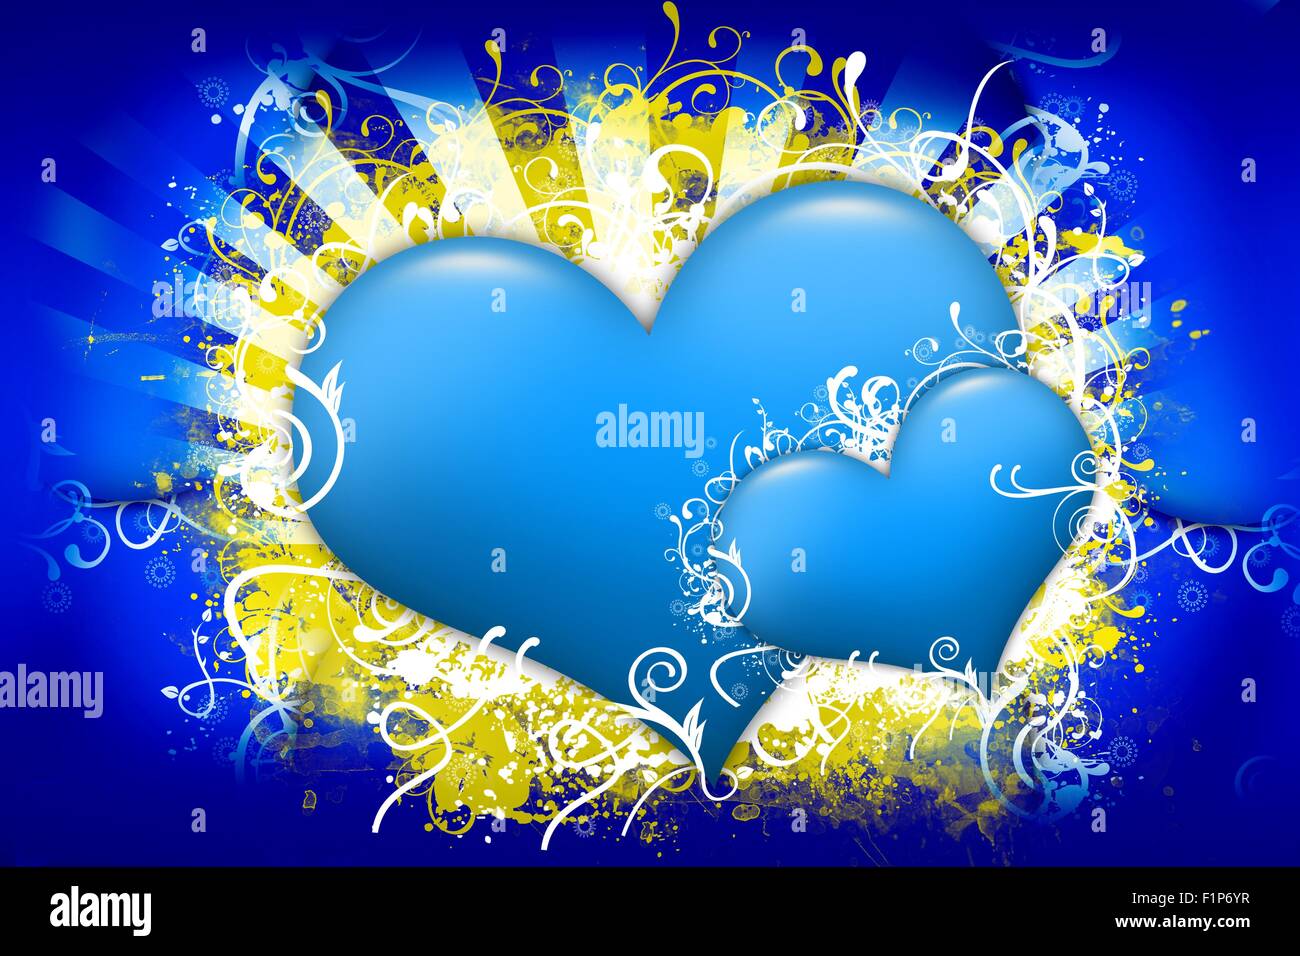 Blue Hearts Design. Two Glassy Blue Hearts with Floral Ornaments. Dark Blue Background with Yellow Grunge Rays. Valentine's Day Stock Photo